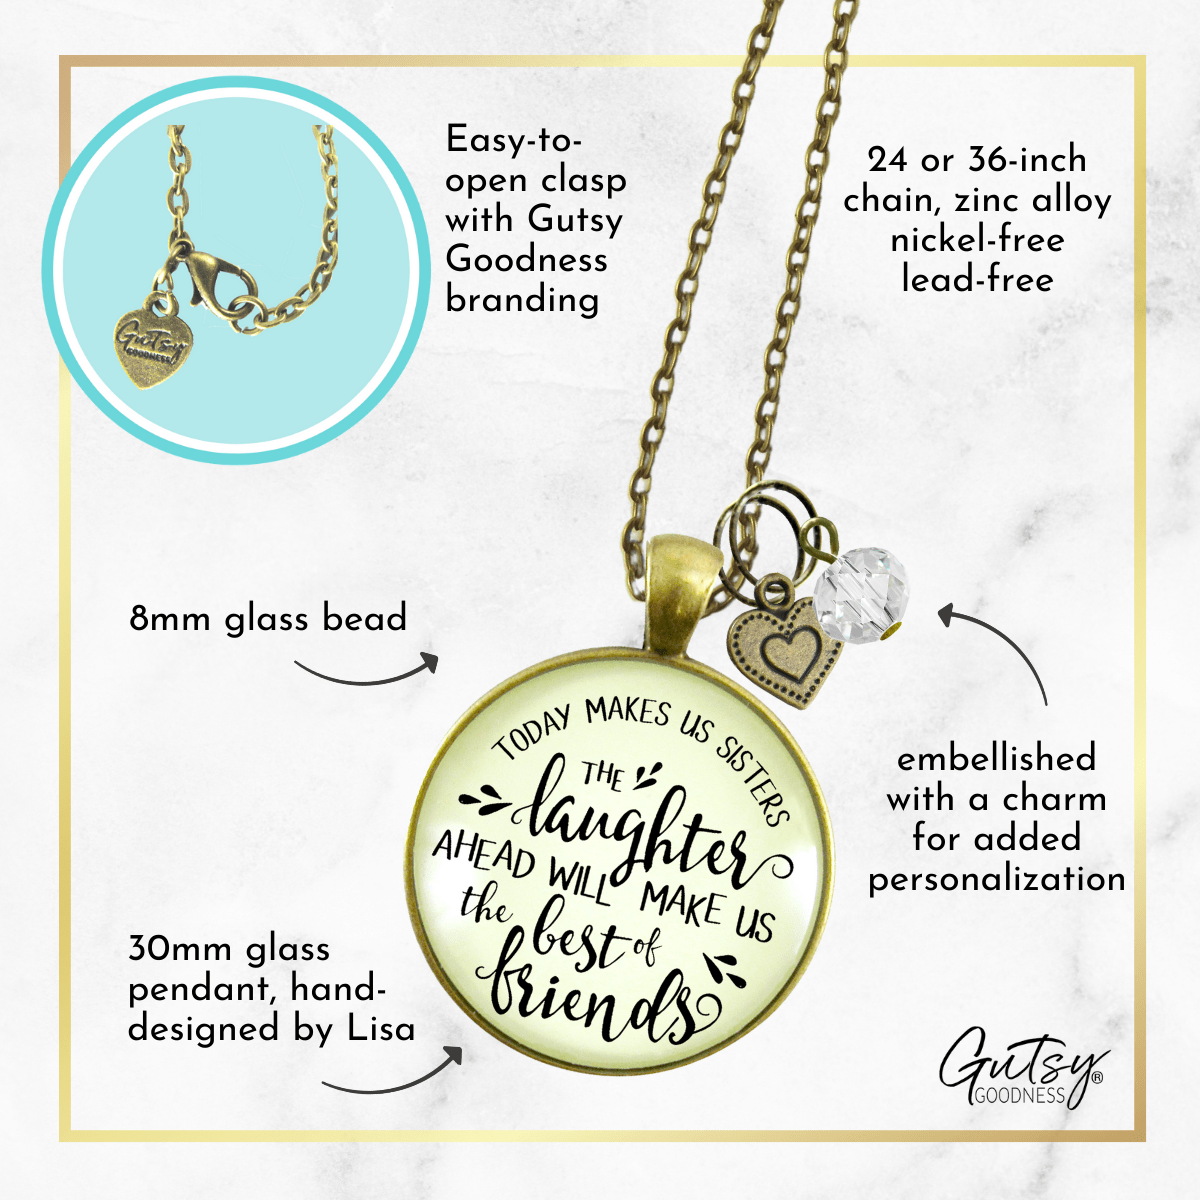 Gutsy Goodness Sister in Law Necklace Today Makes Us Sisters Wedding Day Gift - Gutsy Goodness;Sister In Law Necklace Today Makes Us Sisters Wedding Day Gift - Gutsy Goodness Handmade Jewelry Gifts